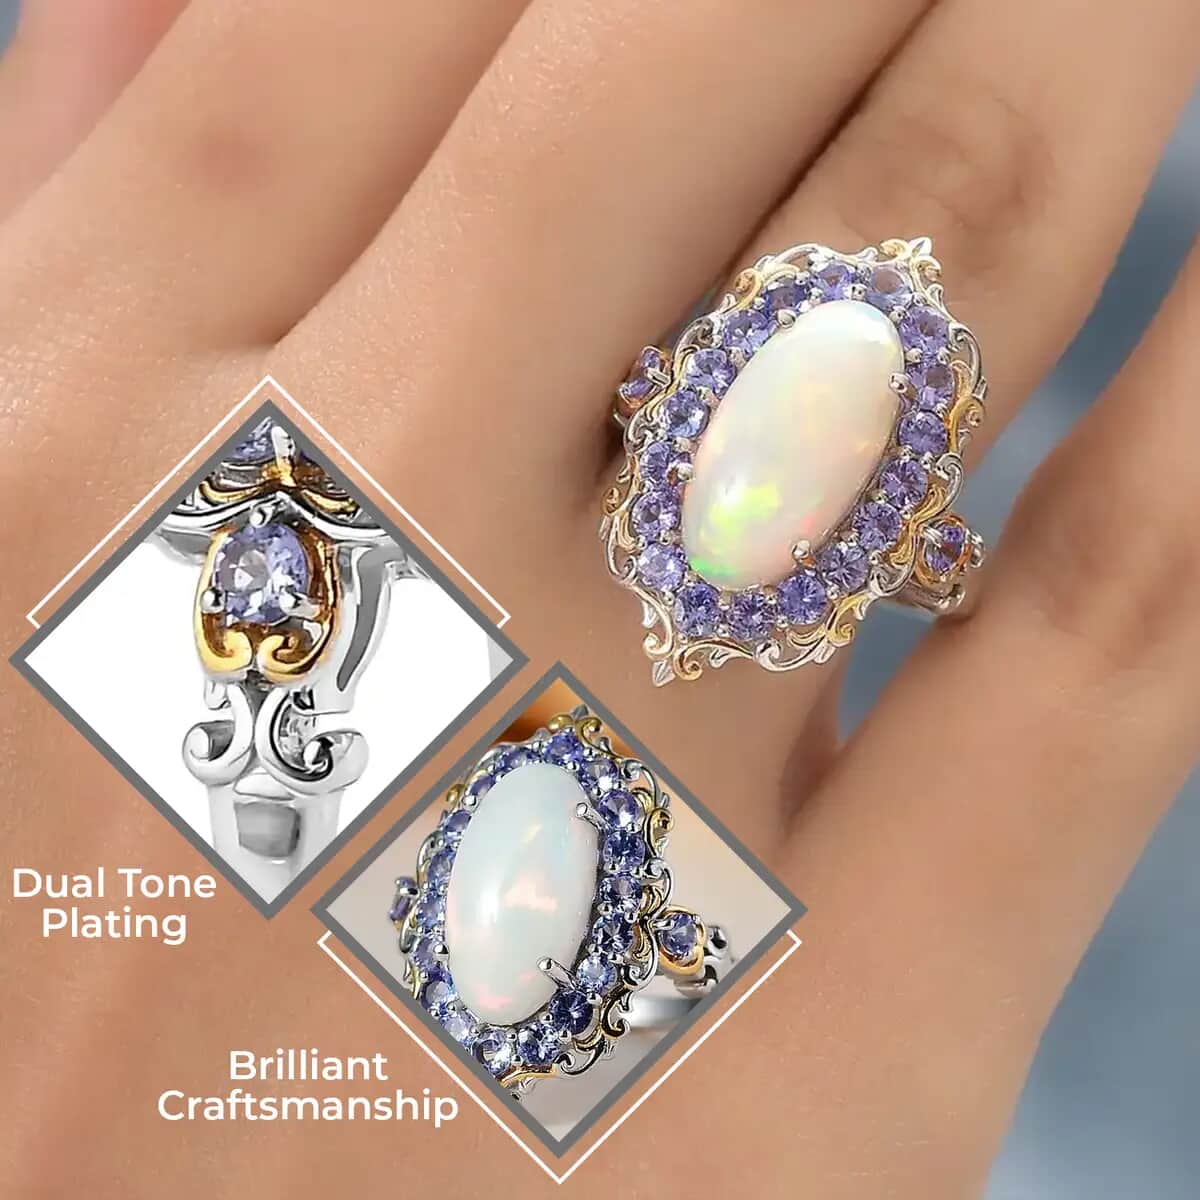 Premium Ethiopian Welo Opal Ring, Tanzanite Accent Ring, Floral Halo Ring, Vermeil YG and Platinum Over Sterling Silver Ring, Opal Jewelry, Gifts For Her 4.75 ctw (Size 10.0) image number 2